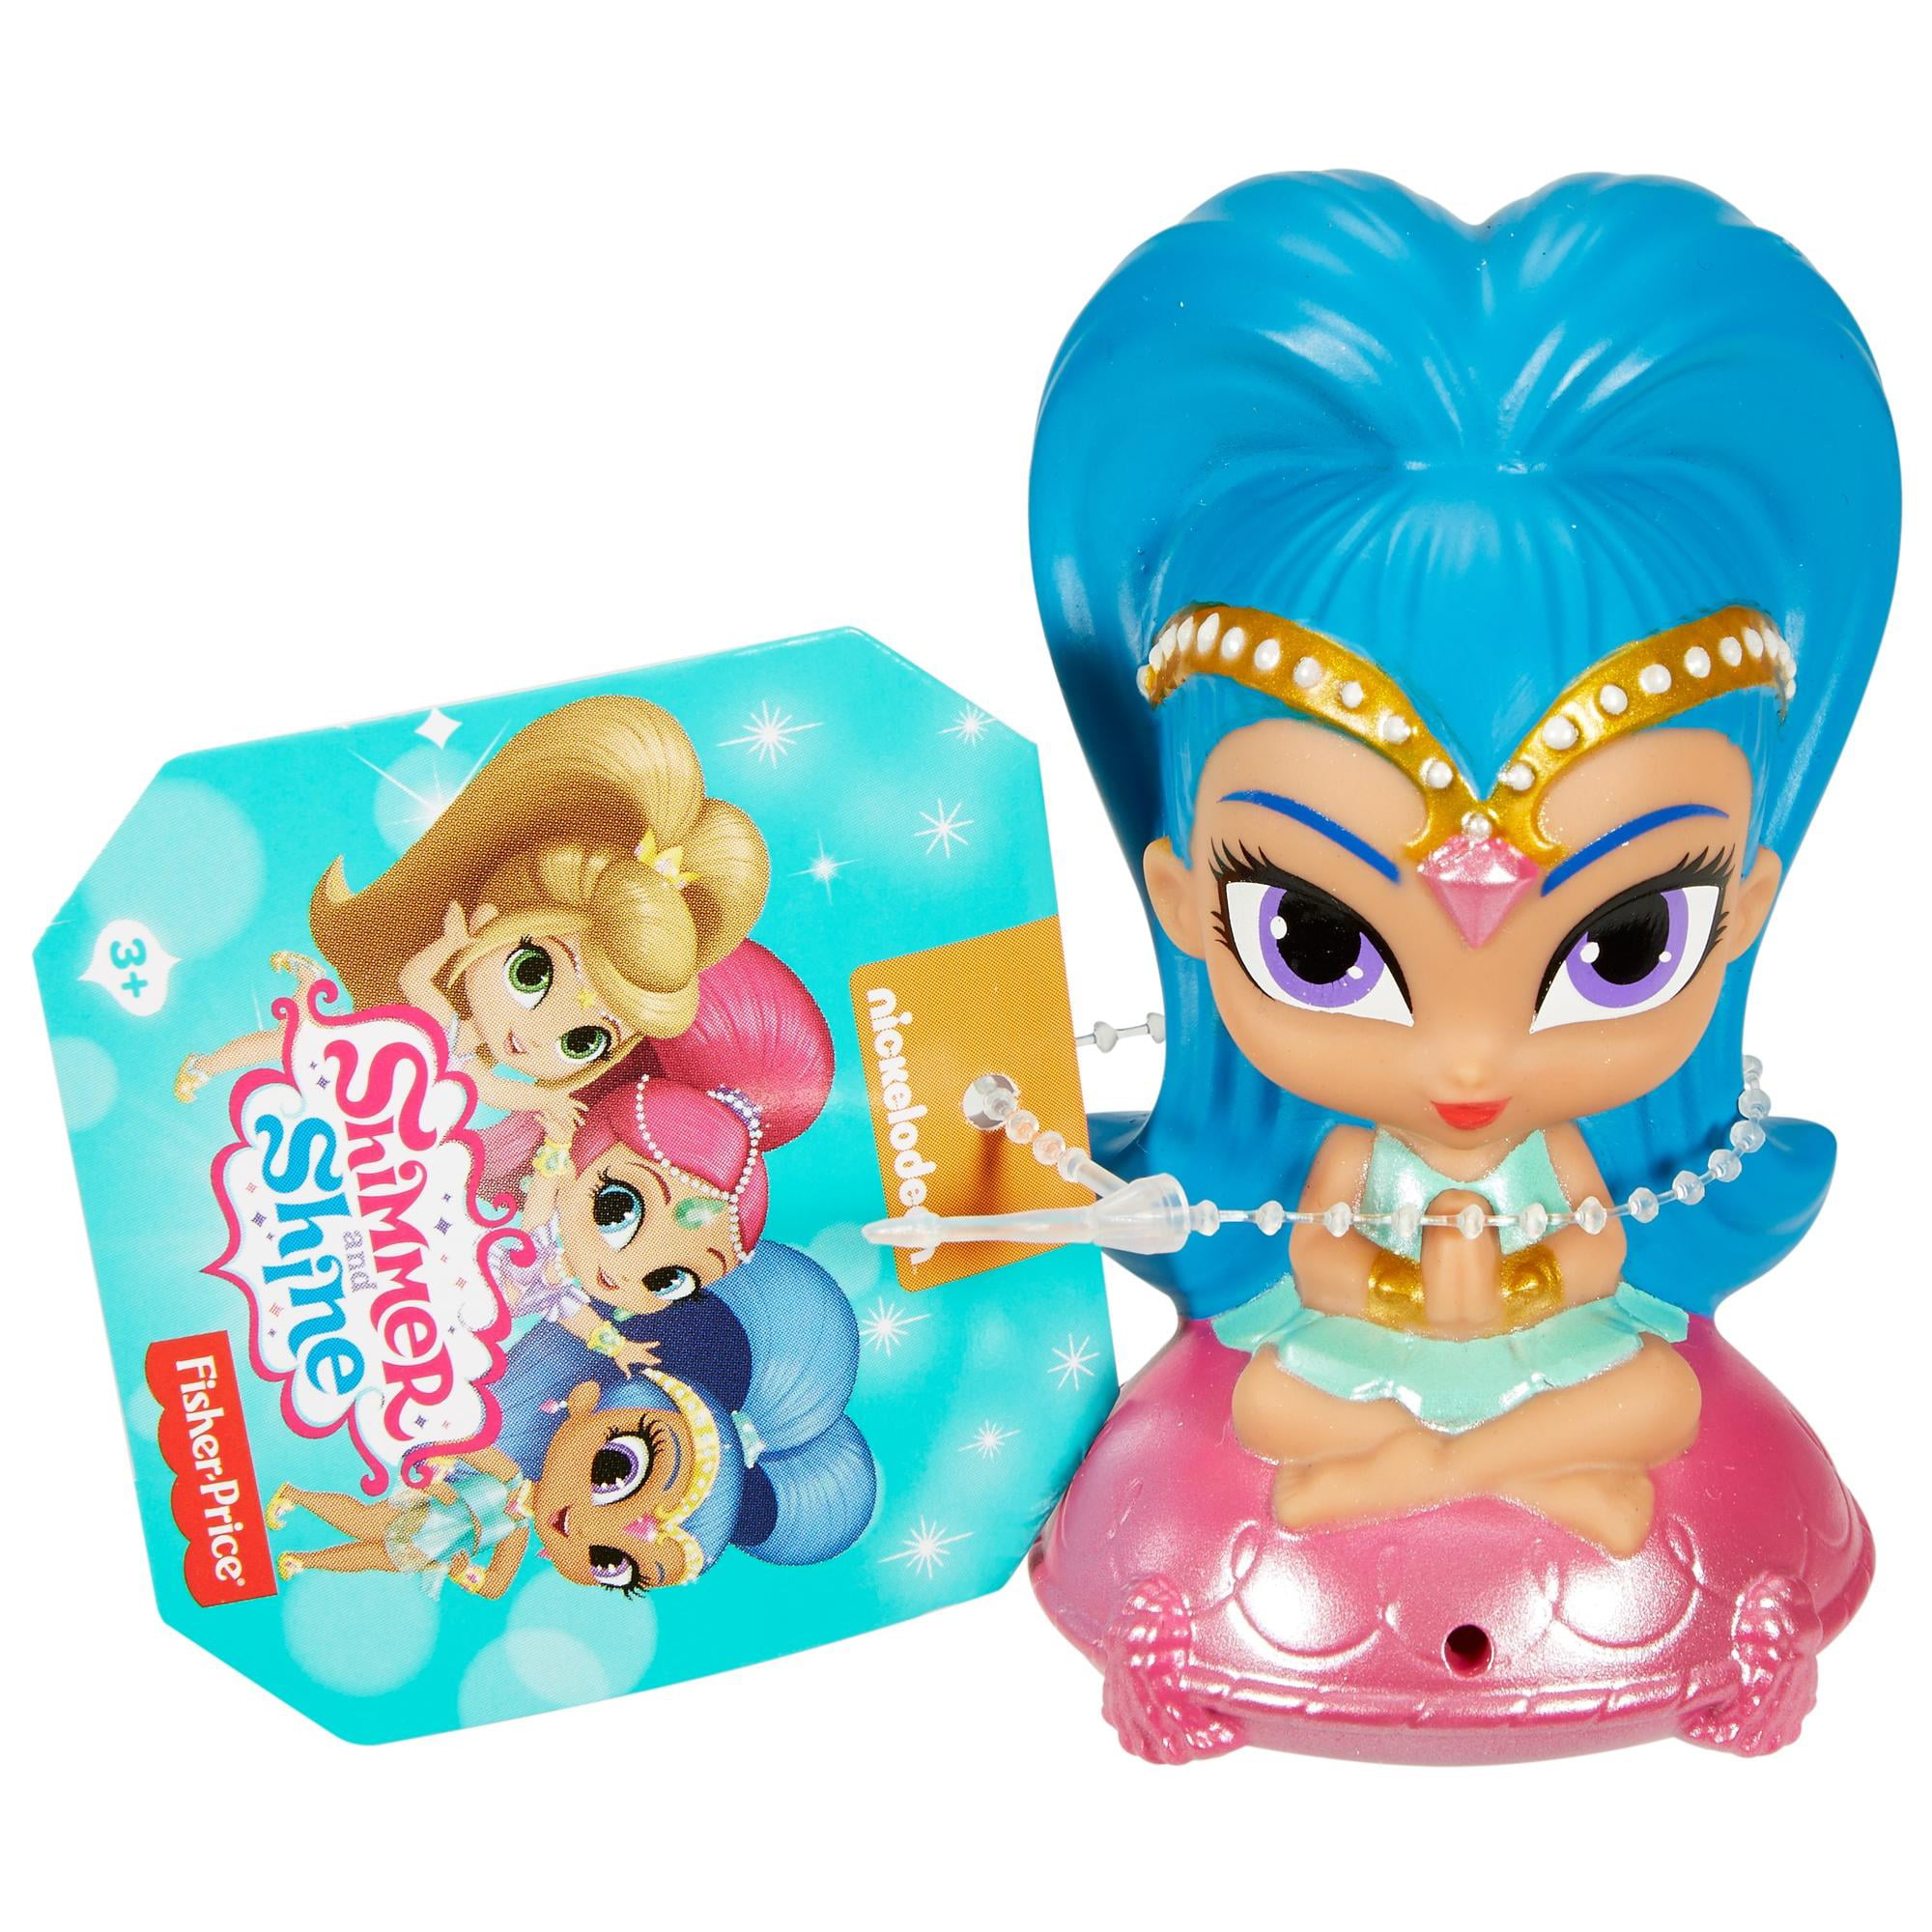 Shimmer and Shine Bath Doll Assortment│Baby's Bathing Fun Activity Toy│GiftWare 